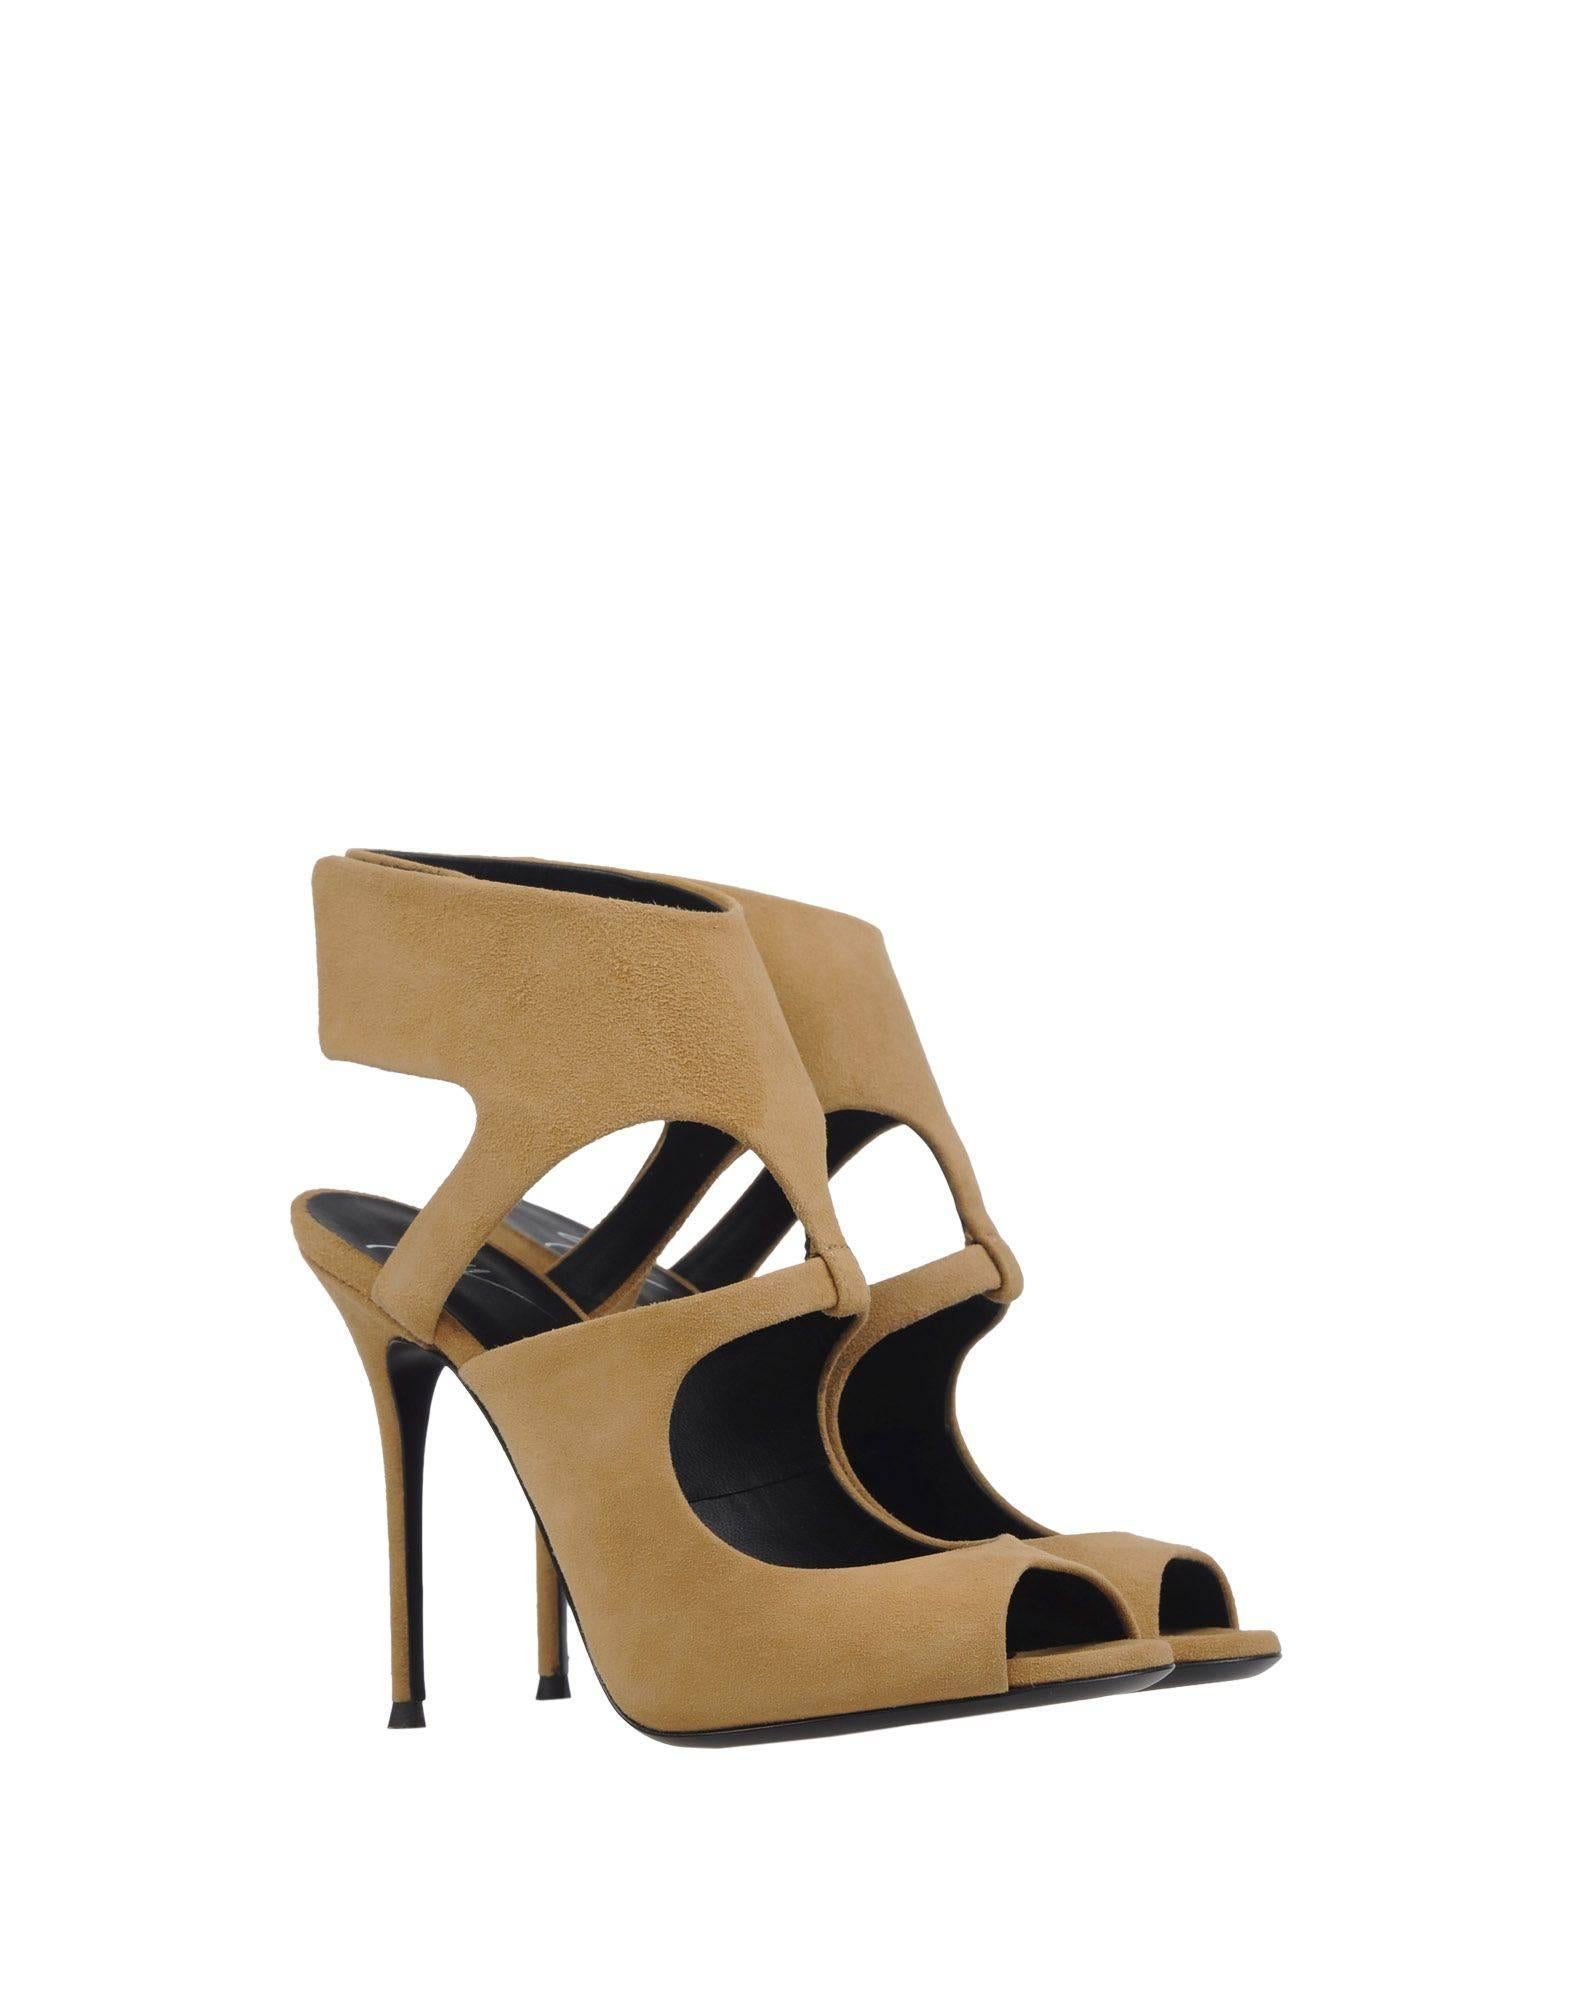 CURATOR'S NOTES 

Giuseppe Zanotti New Tan Suede Cut Out Evening Sandals Heels in Box  

Size IT 36 

Suede 

Velcro closure 

Made in Italy 

Heel height 4.25